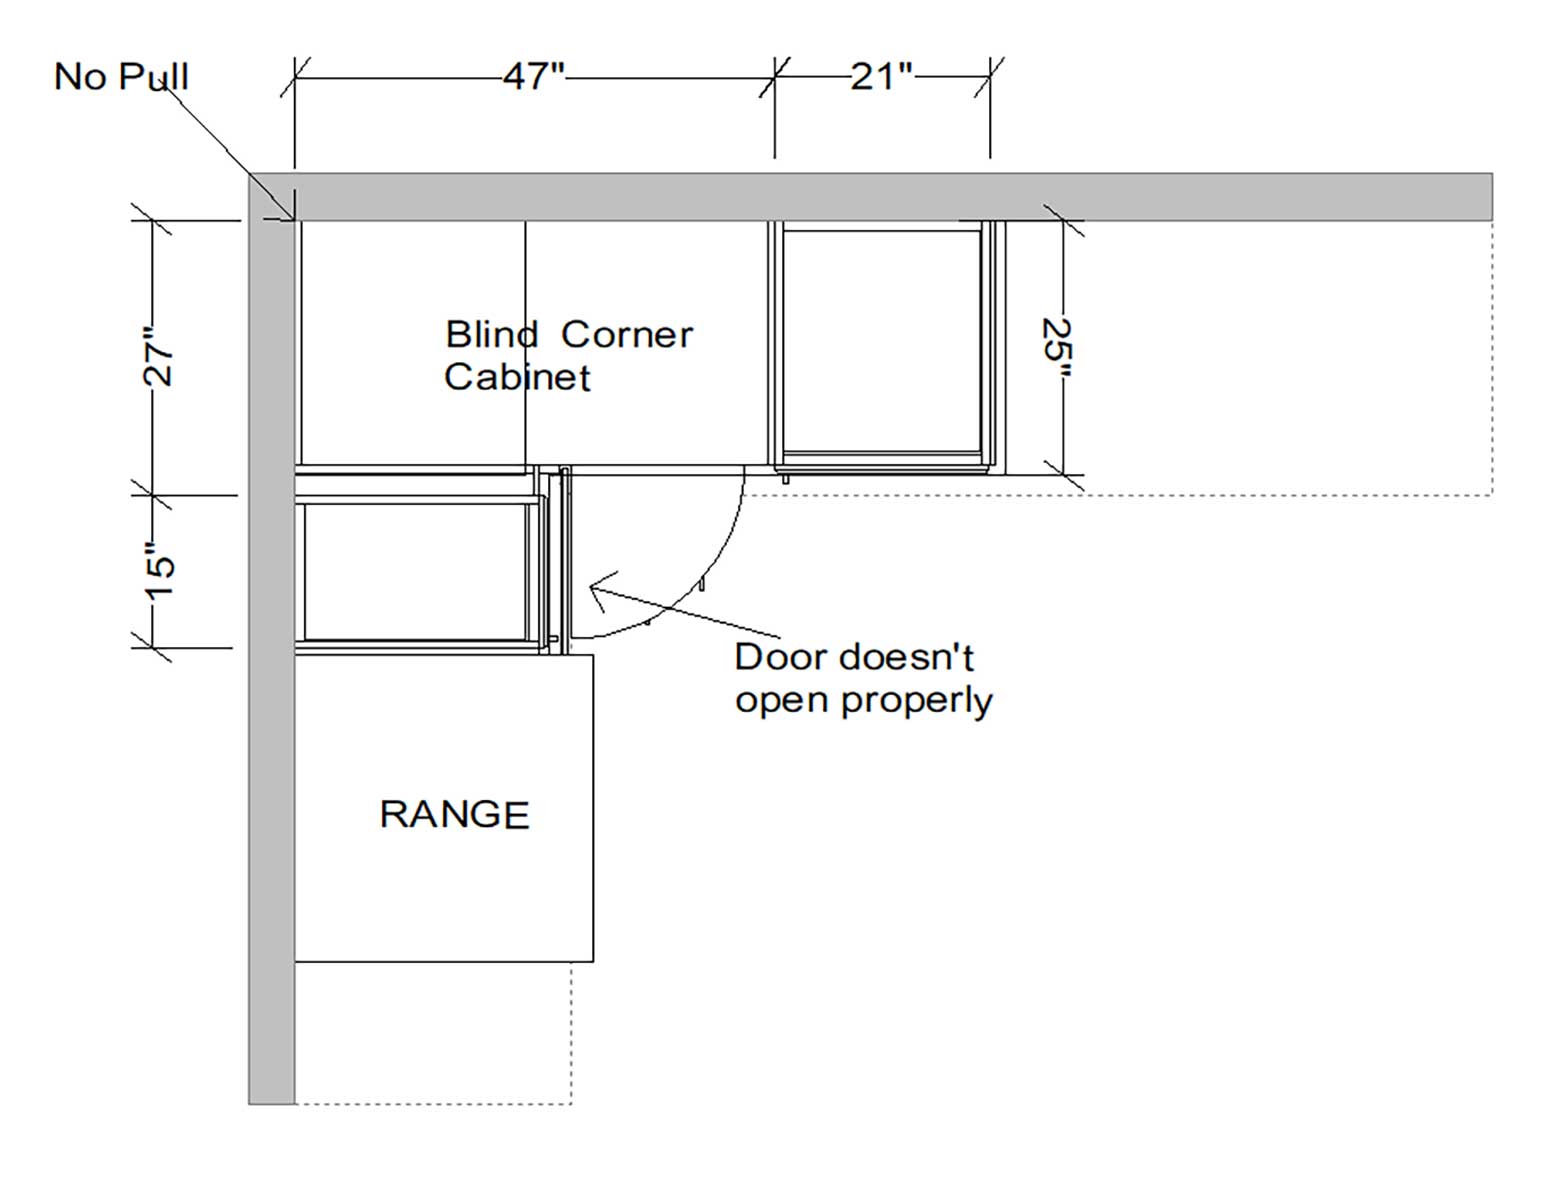 floor plan showing IKEA blind corner cabinet with no pull